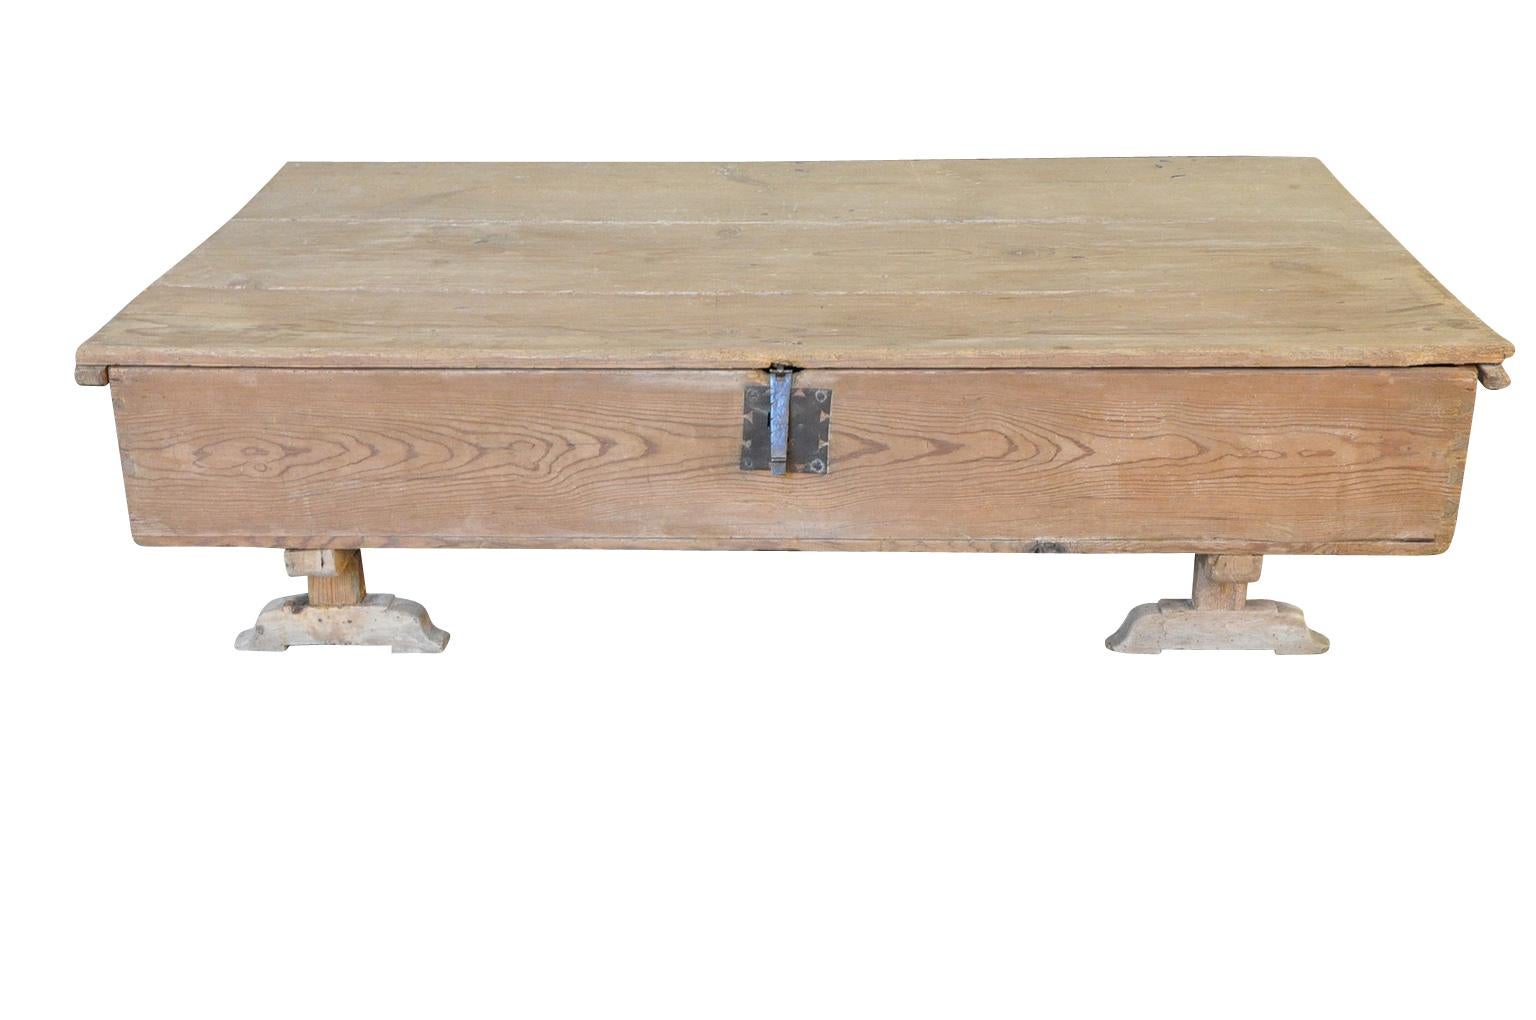 A very handsome Portuguese grand scale primitive coffee, trunk resting on its feet, now as a coffee table. Soundly constructed from pine. Great surface area and storage.